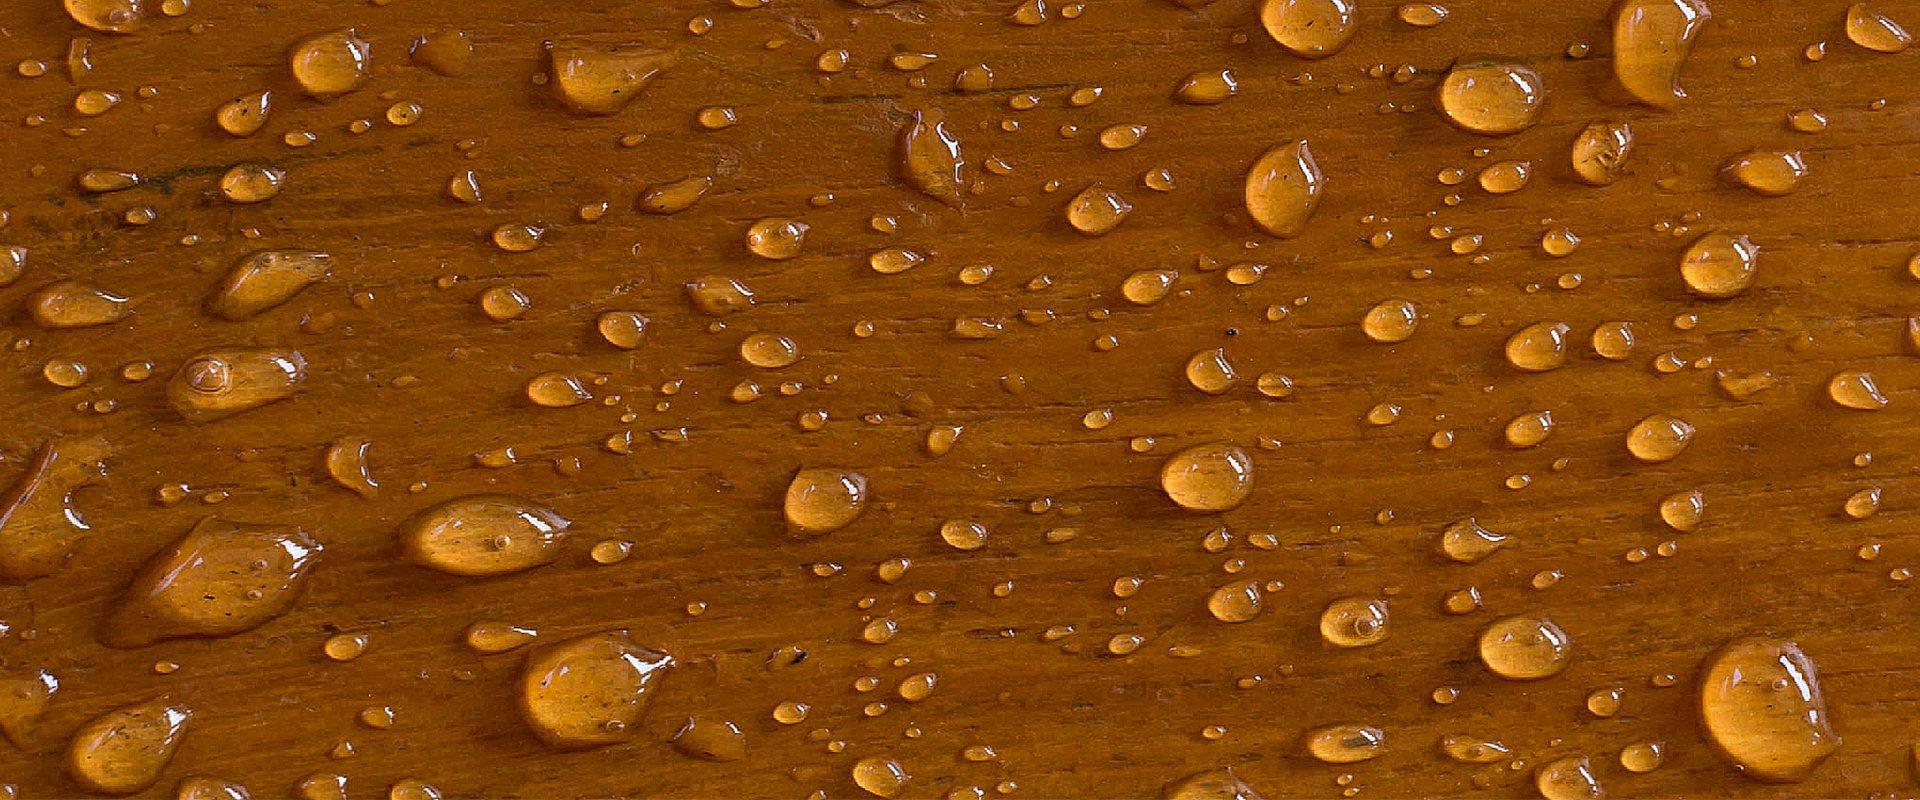 water droplets on wood